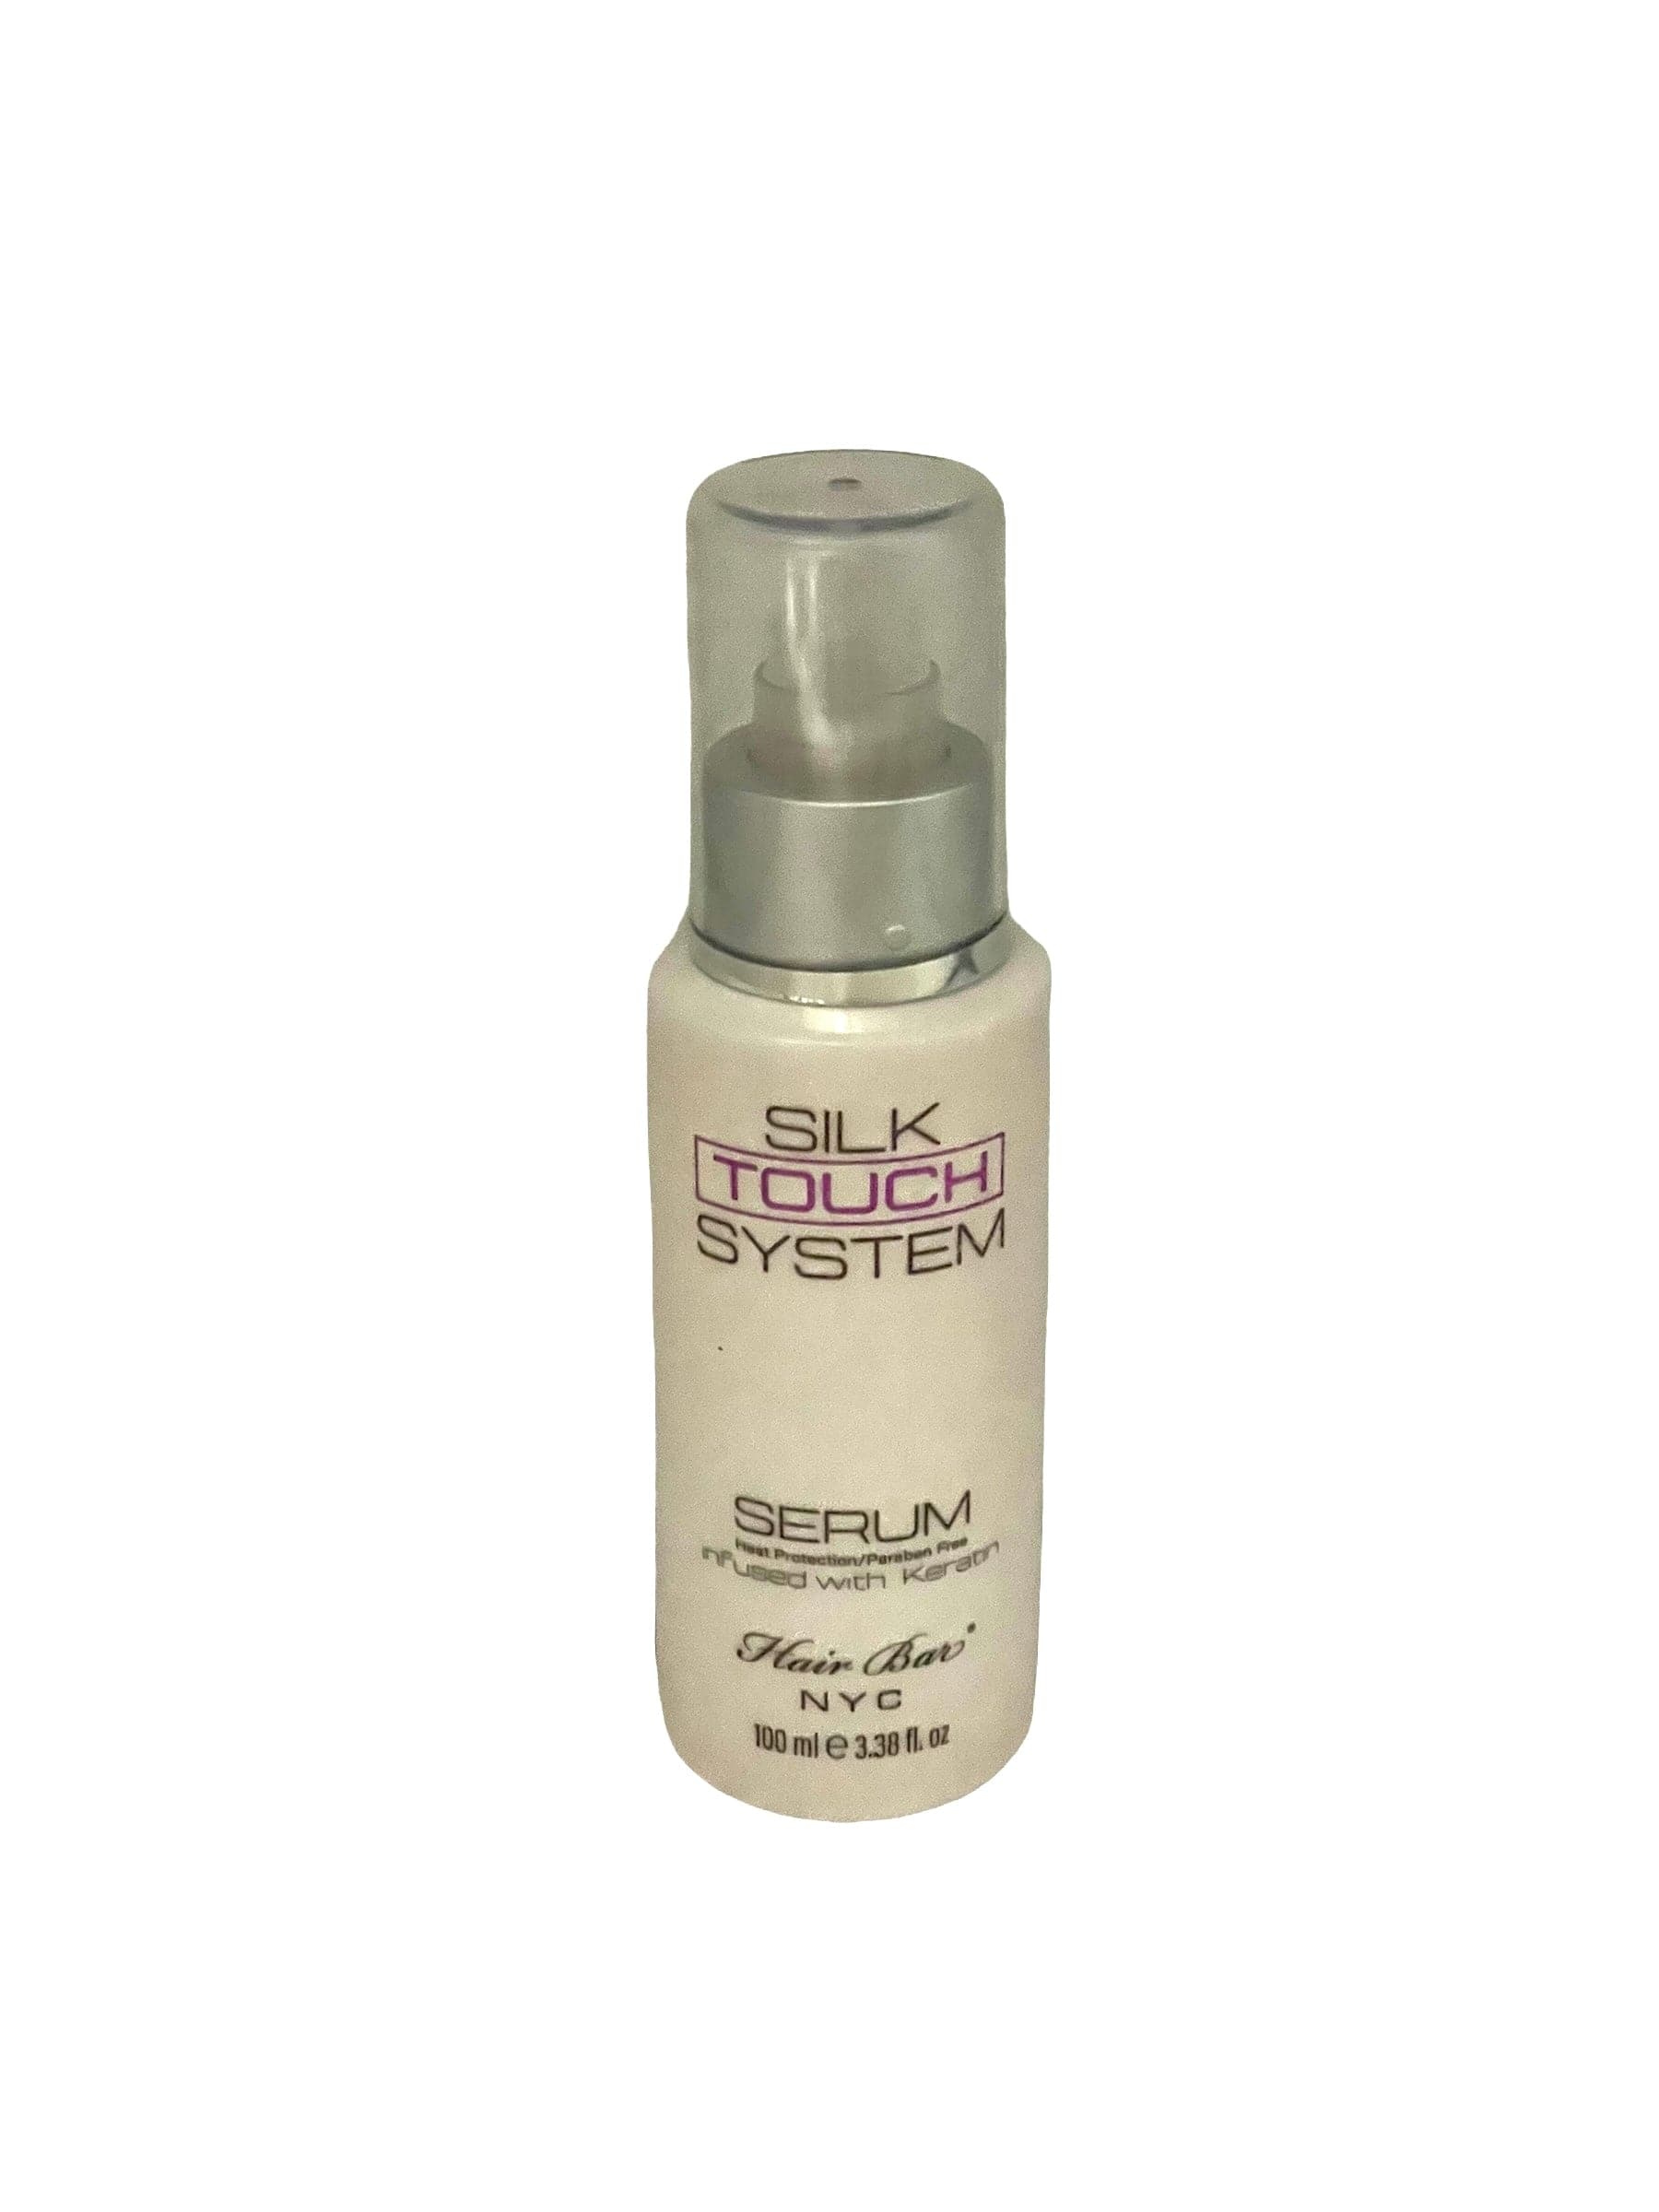 Hair Serum & Heat Protector Silk Touch System Serum 3.38 oz Hair Styling Products